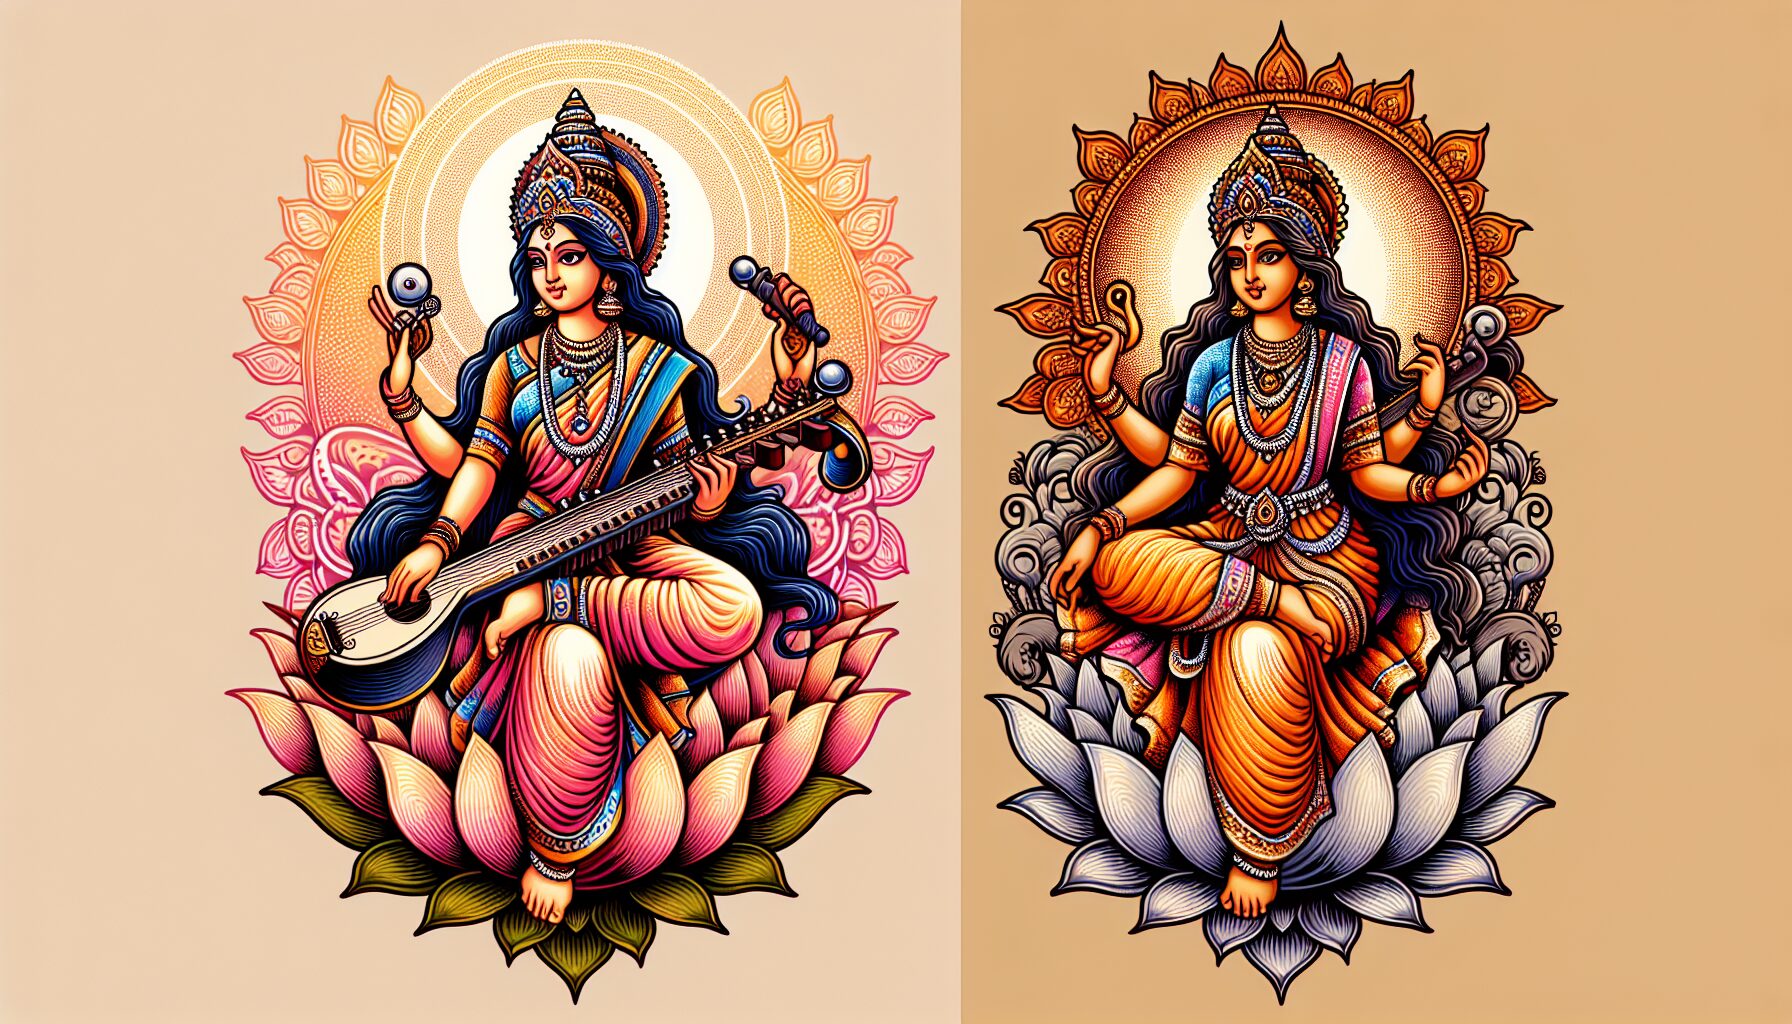 What Are The Different Forms Of Saraswati?